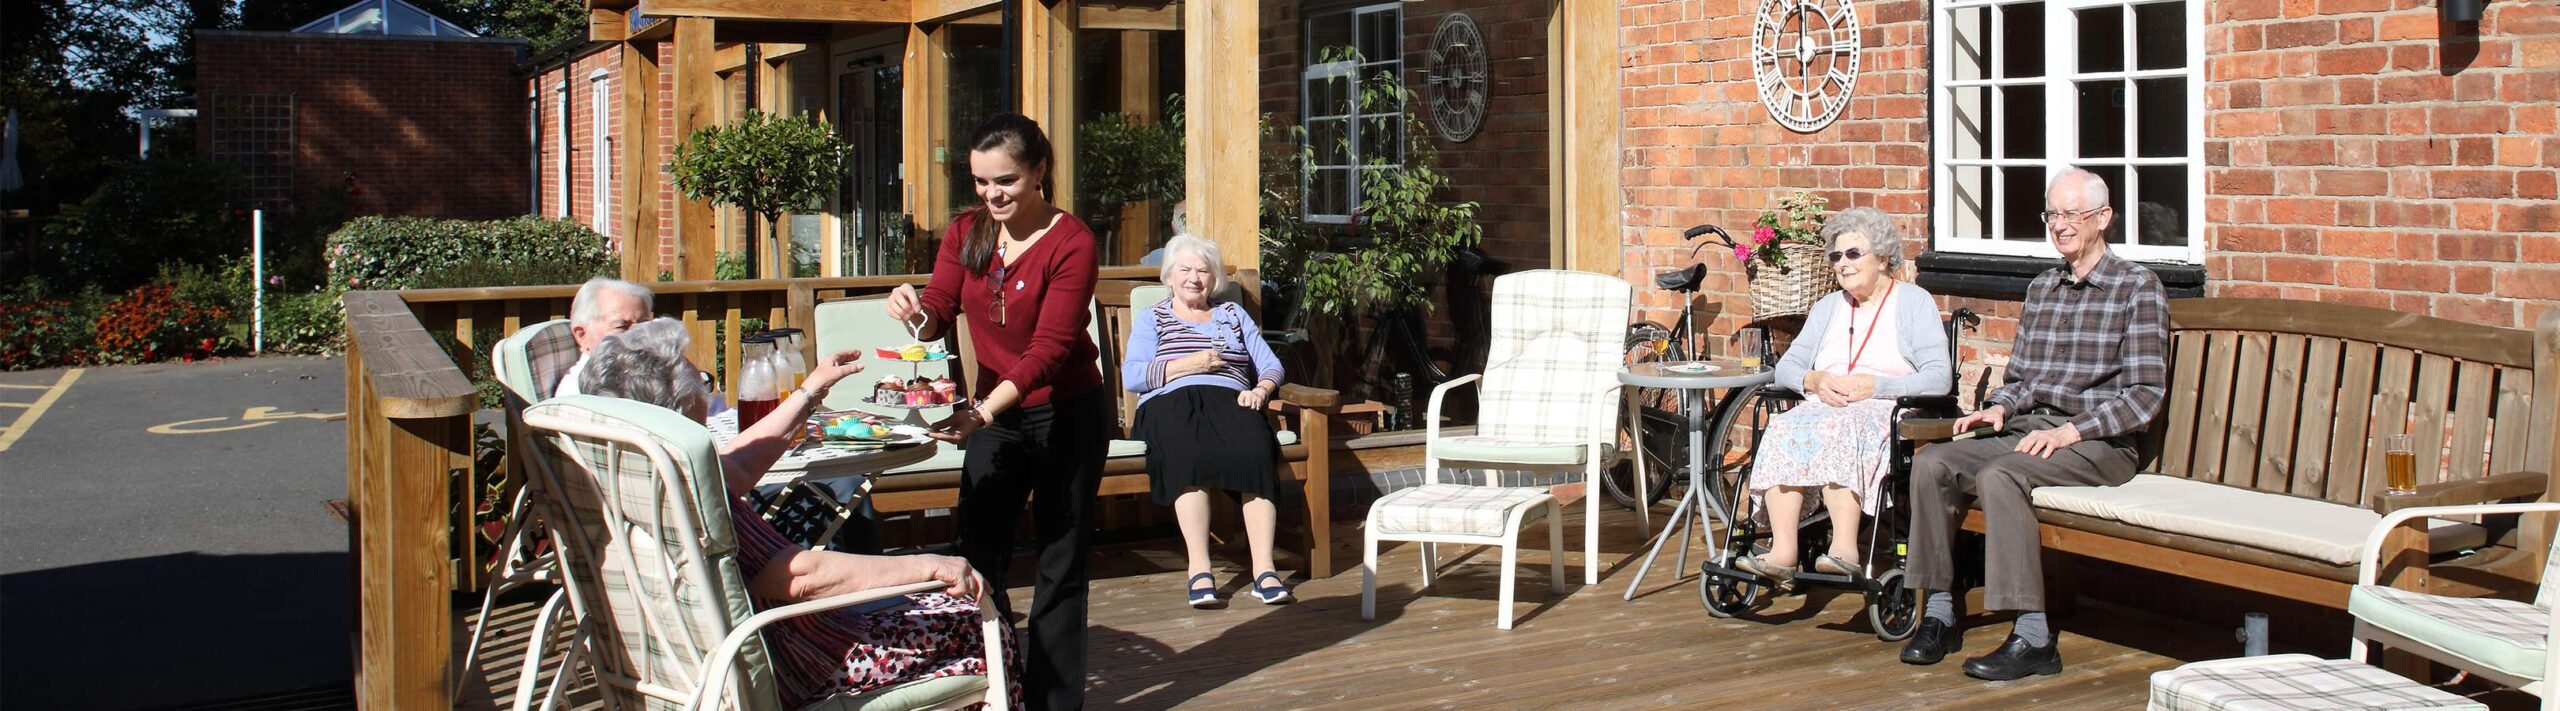 CCH Image showing a collection of residents sat outside eating lunch